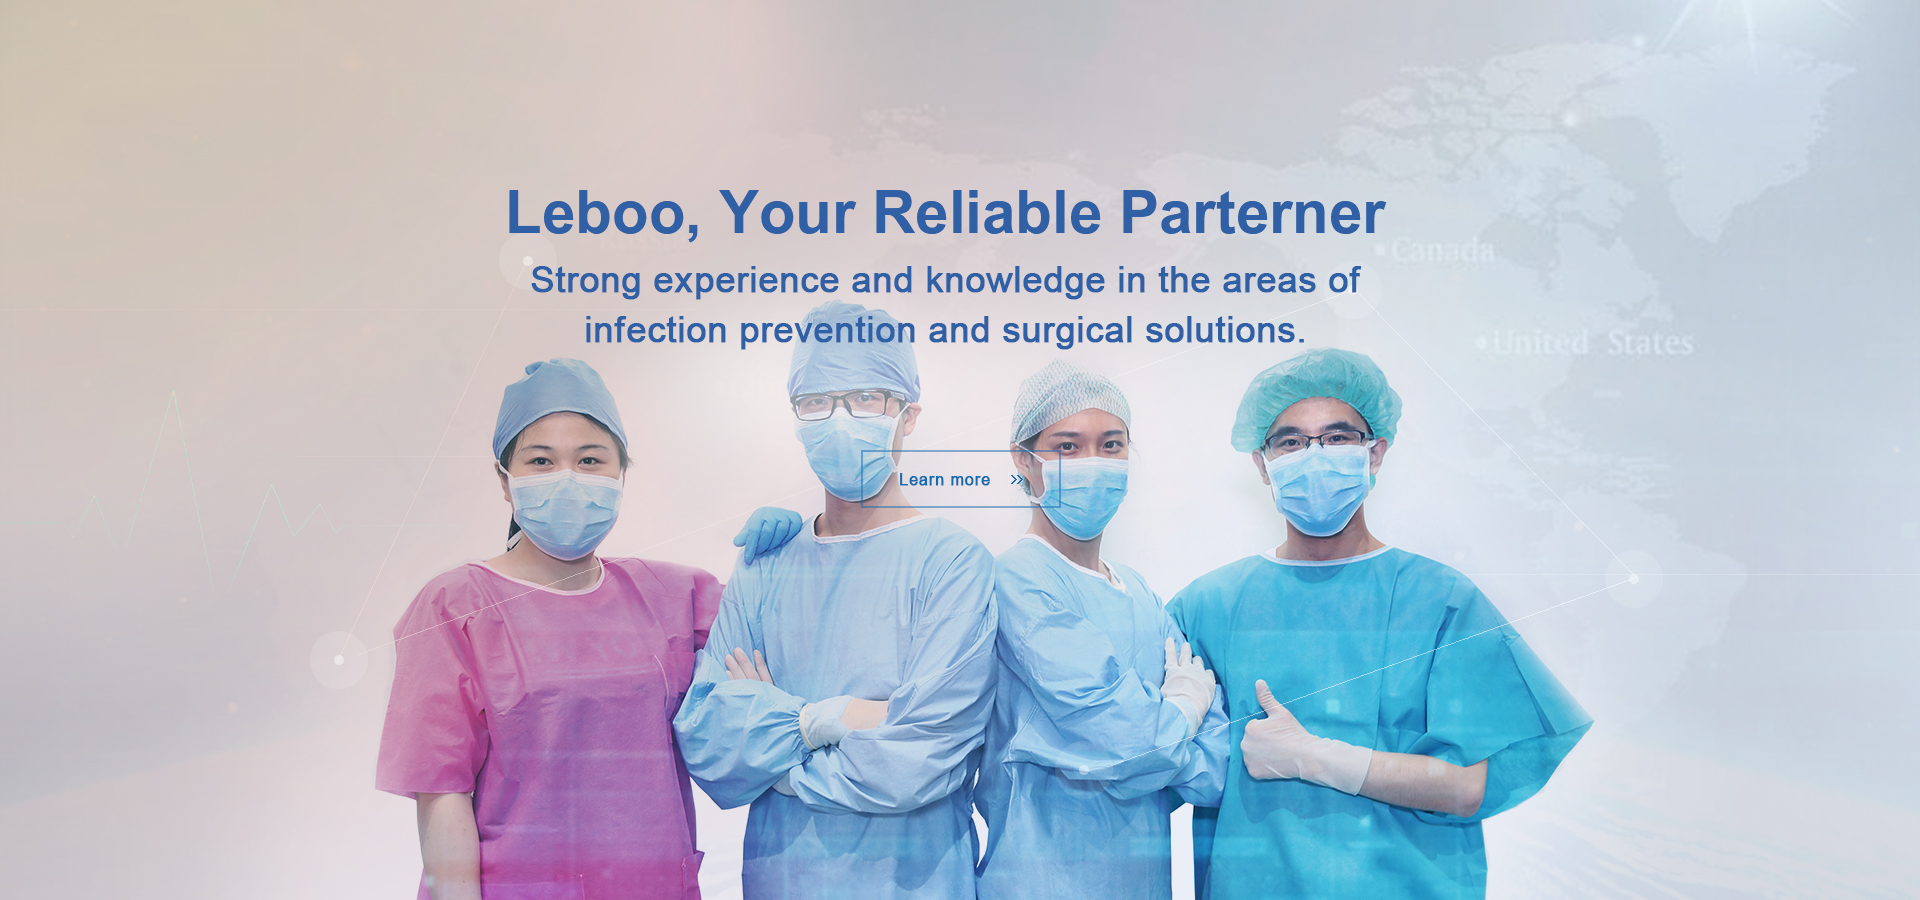 Leboo, Your Reliable Partner.